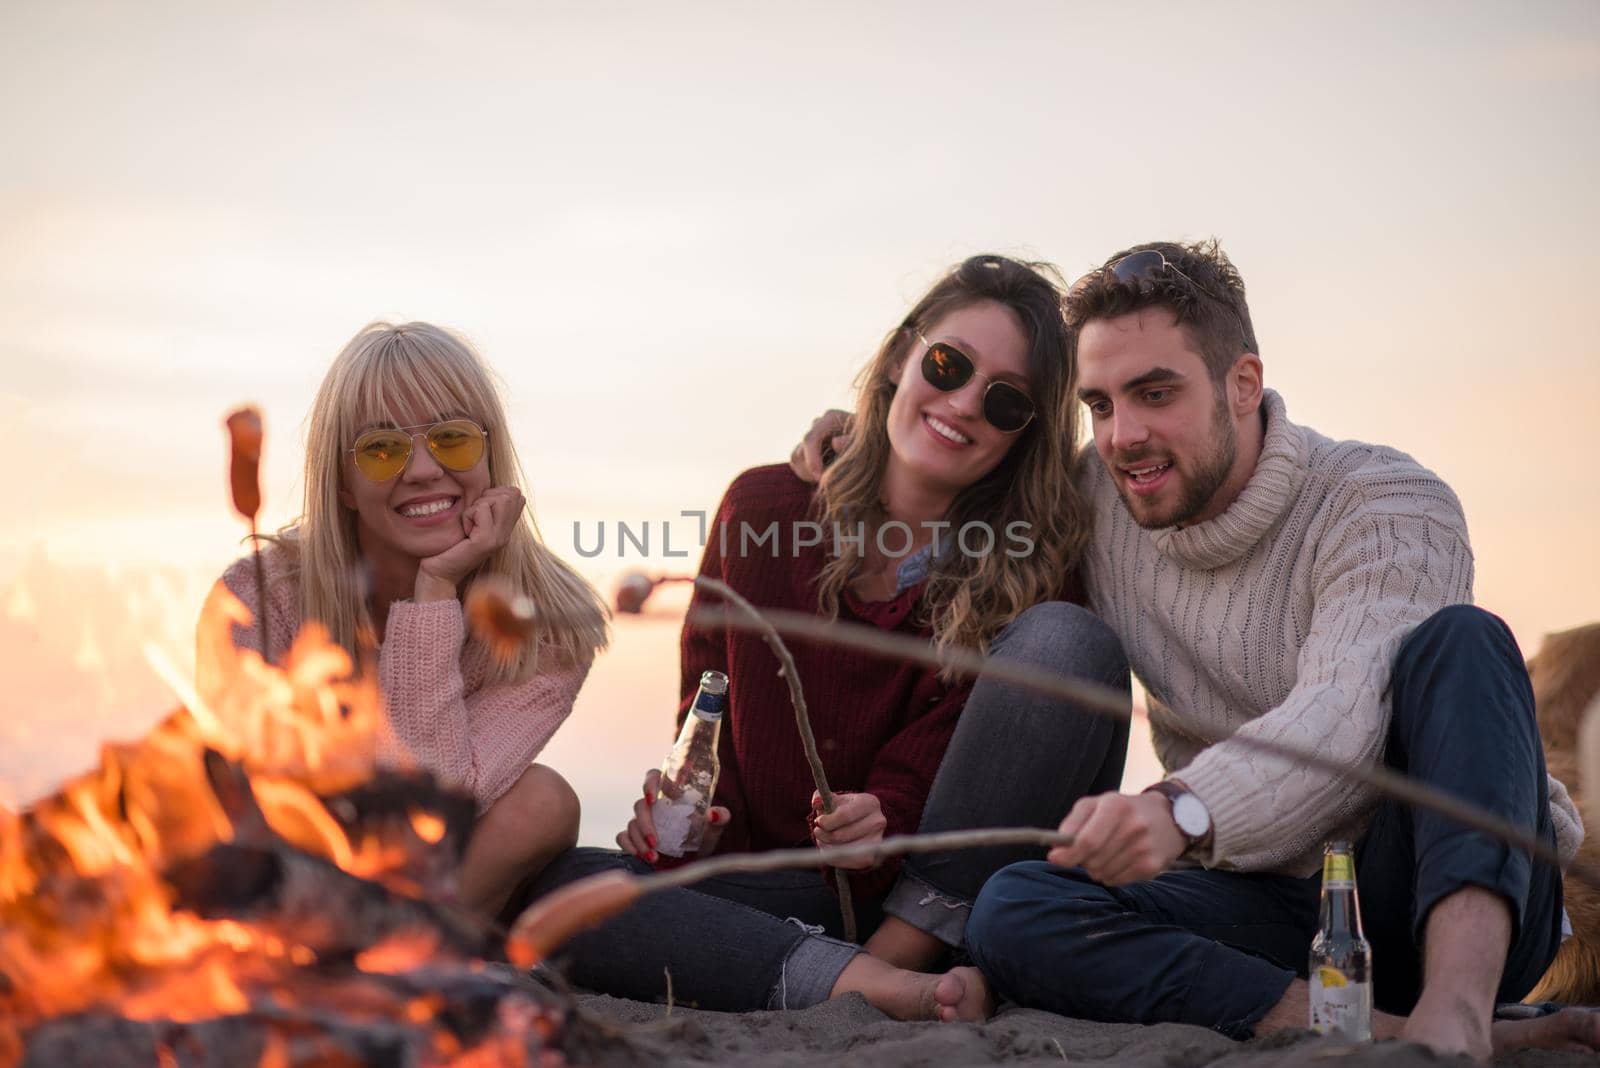 Group of young friends sitting by the fire at autumn beach, grilling sausages and drinking beer, talking and having fun